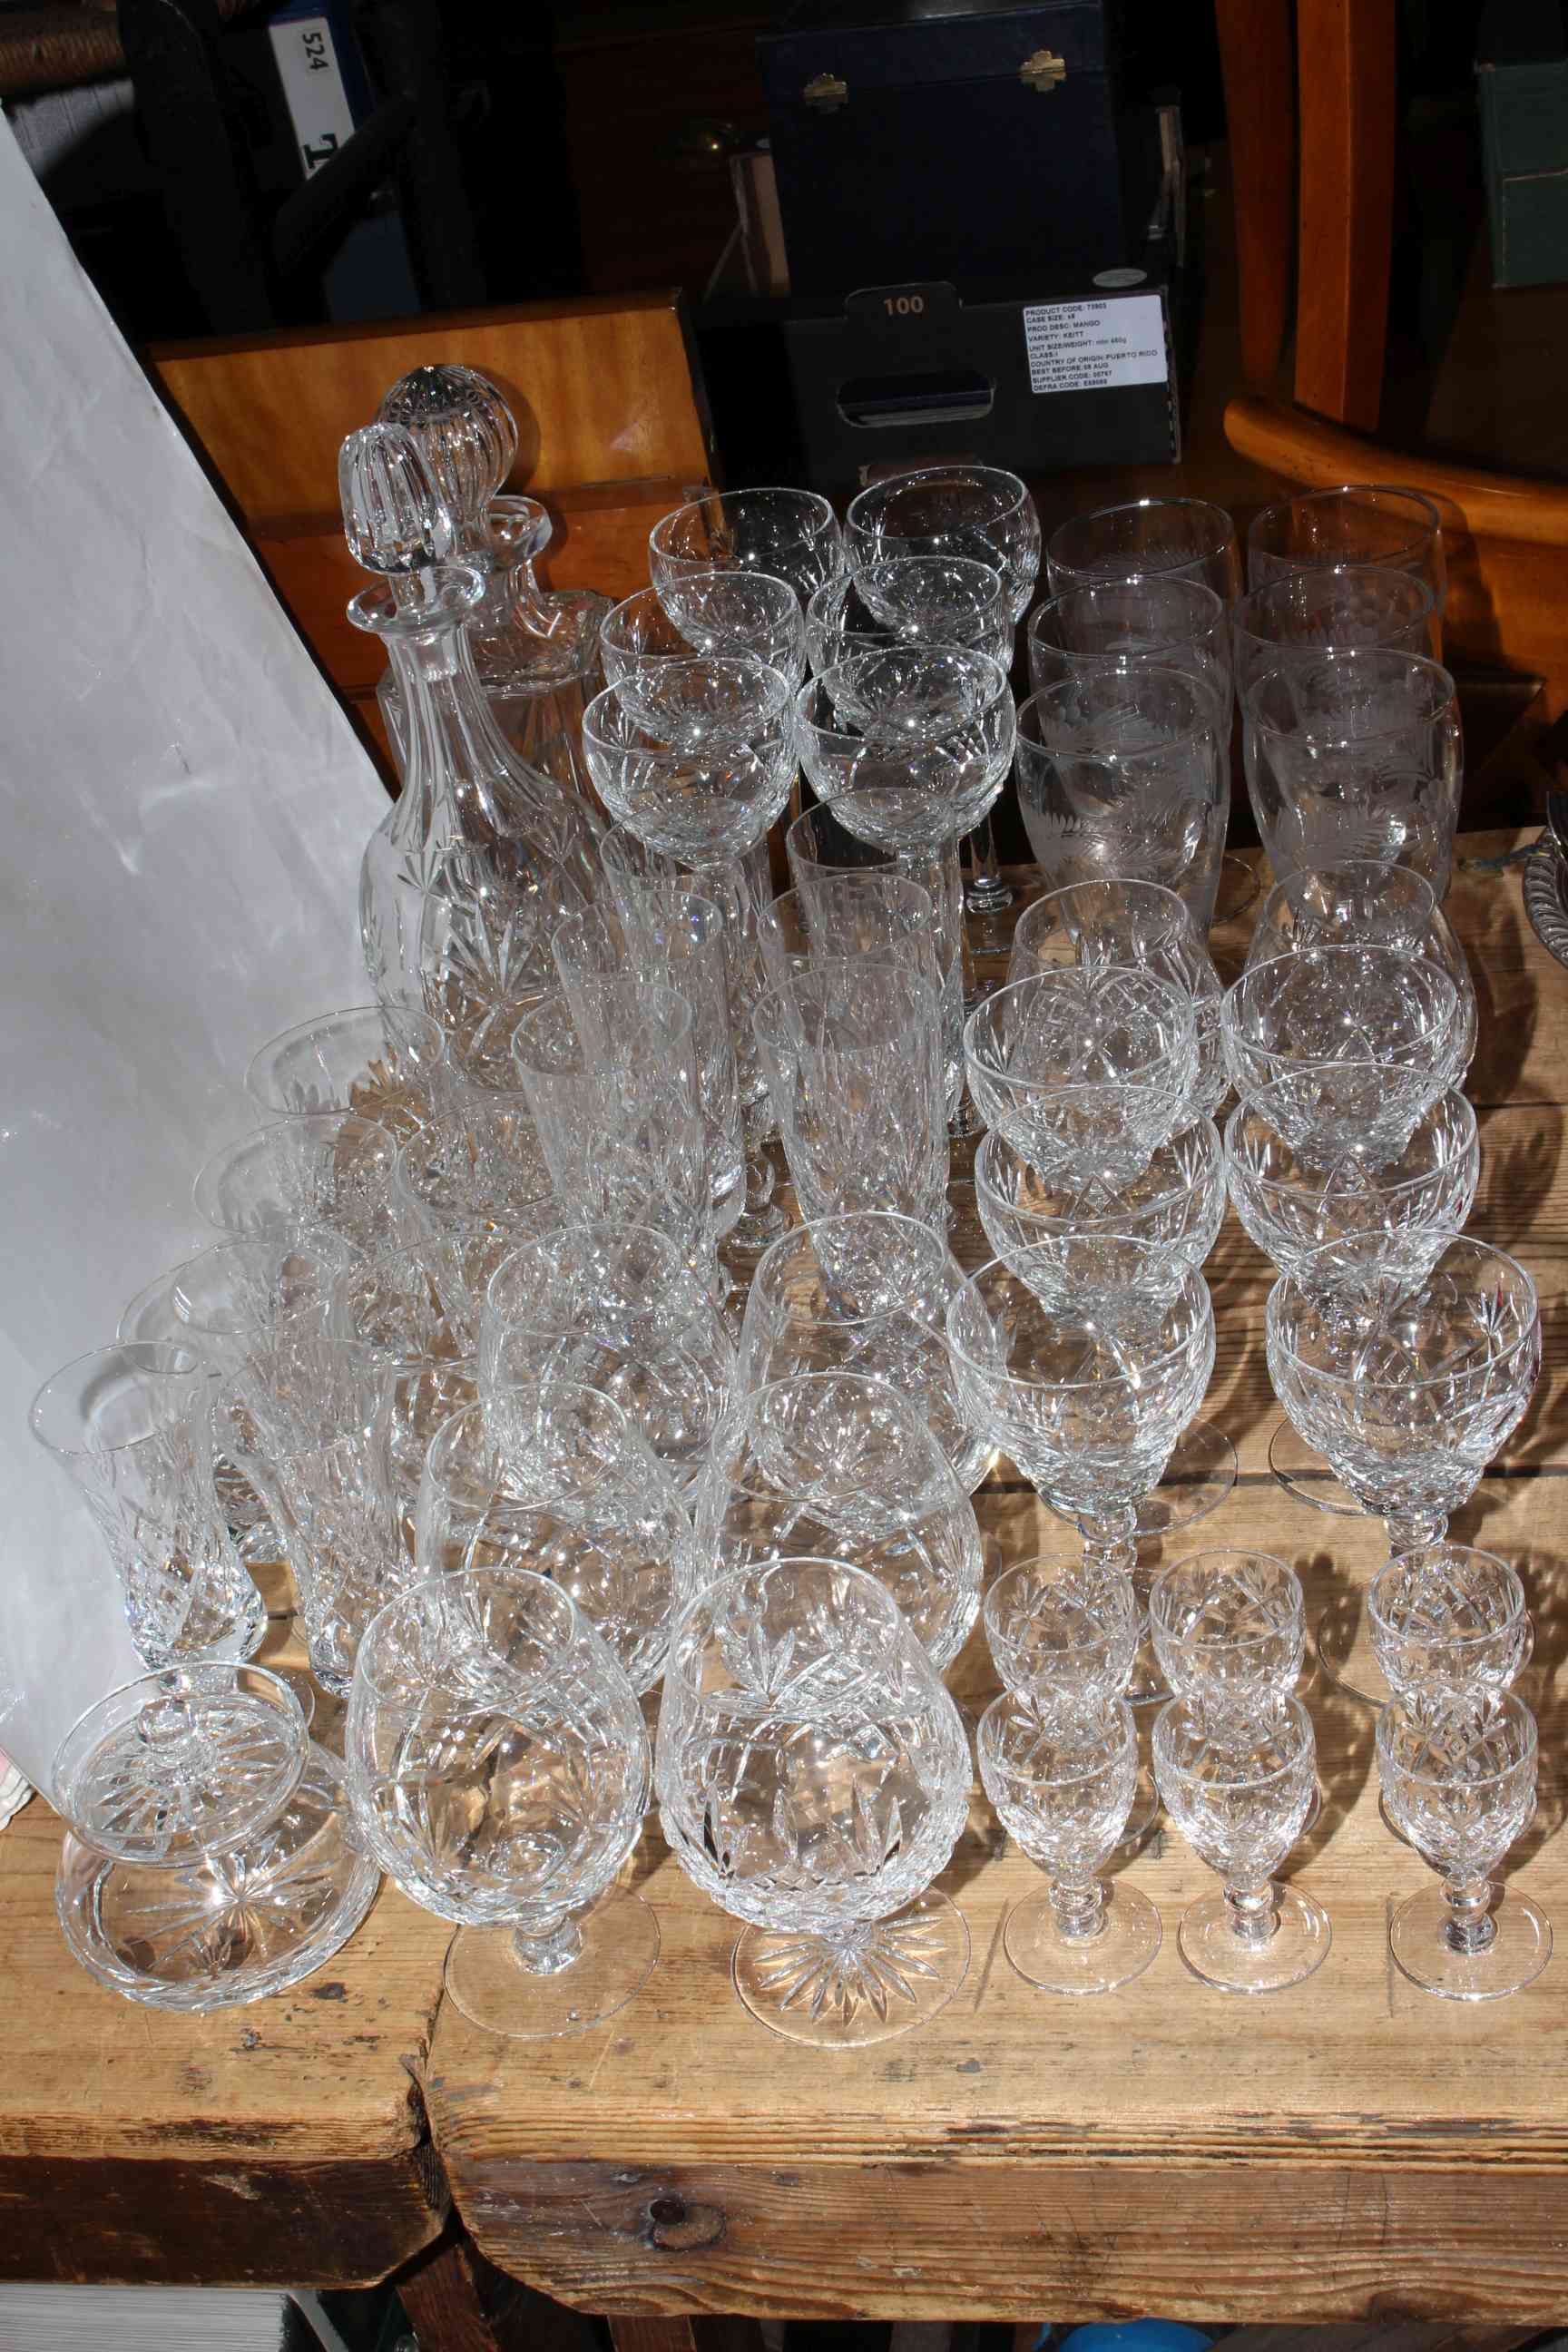 Suite of Brierley crystal including decanter, and further crystal glassware.